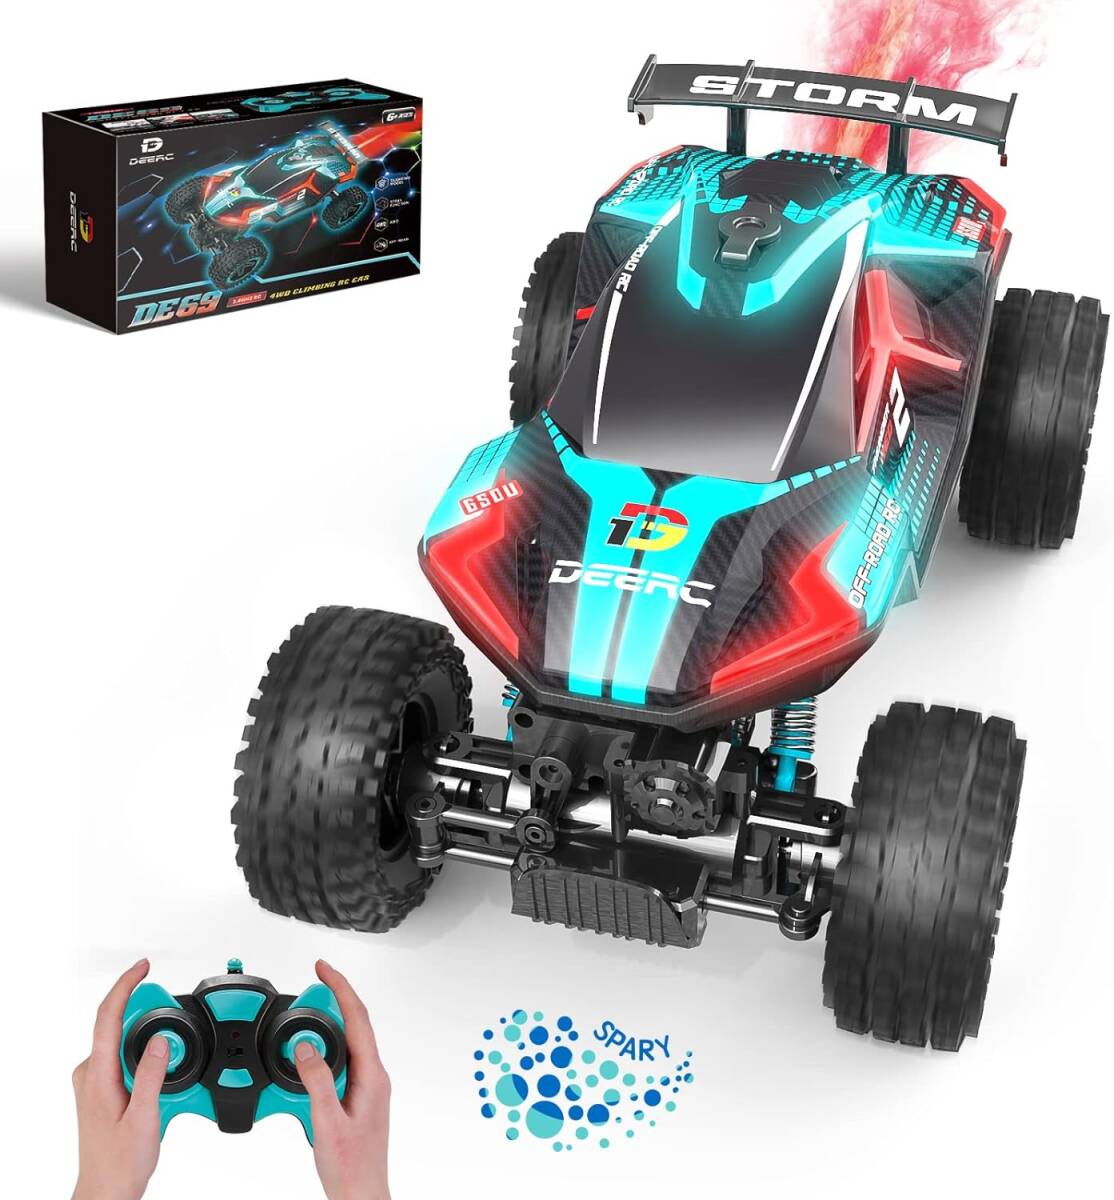 DE69 DEERC radio controlled car ... oriented off-road 4WD four wheel drive operation hour 70 minute battery 2 piece RC car 1/16s